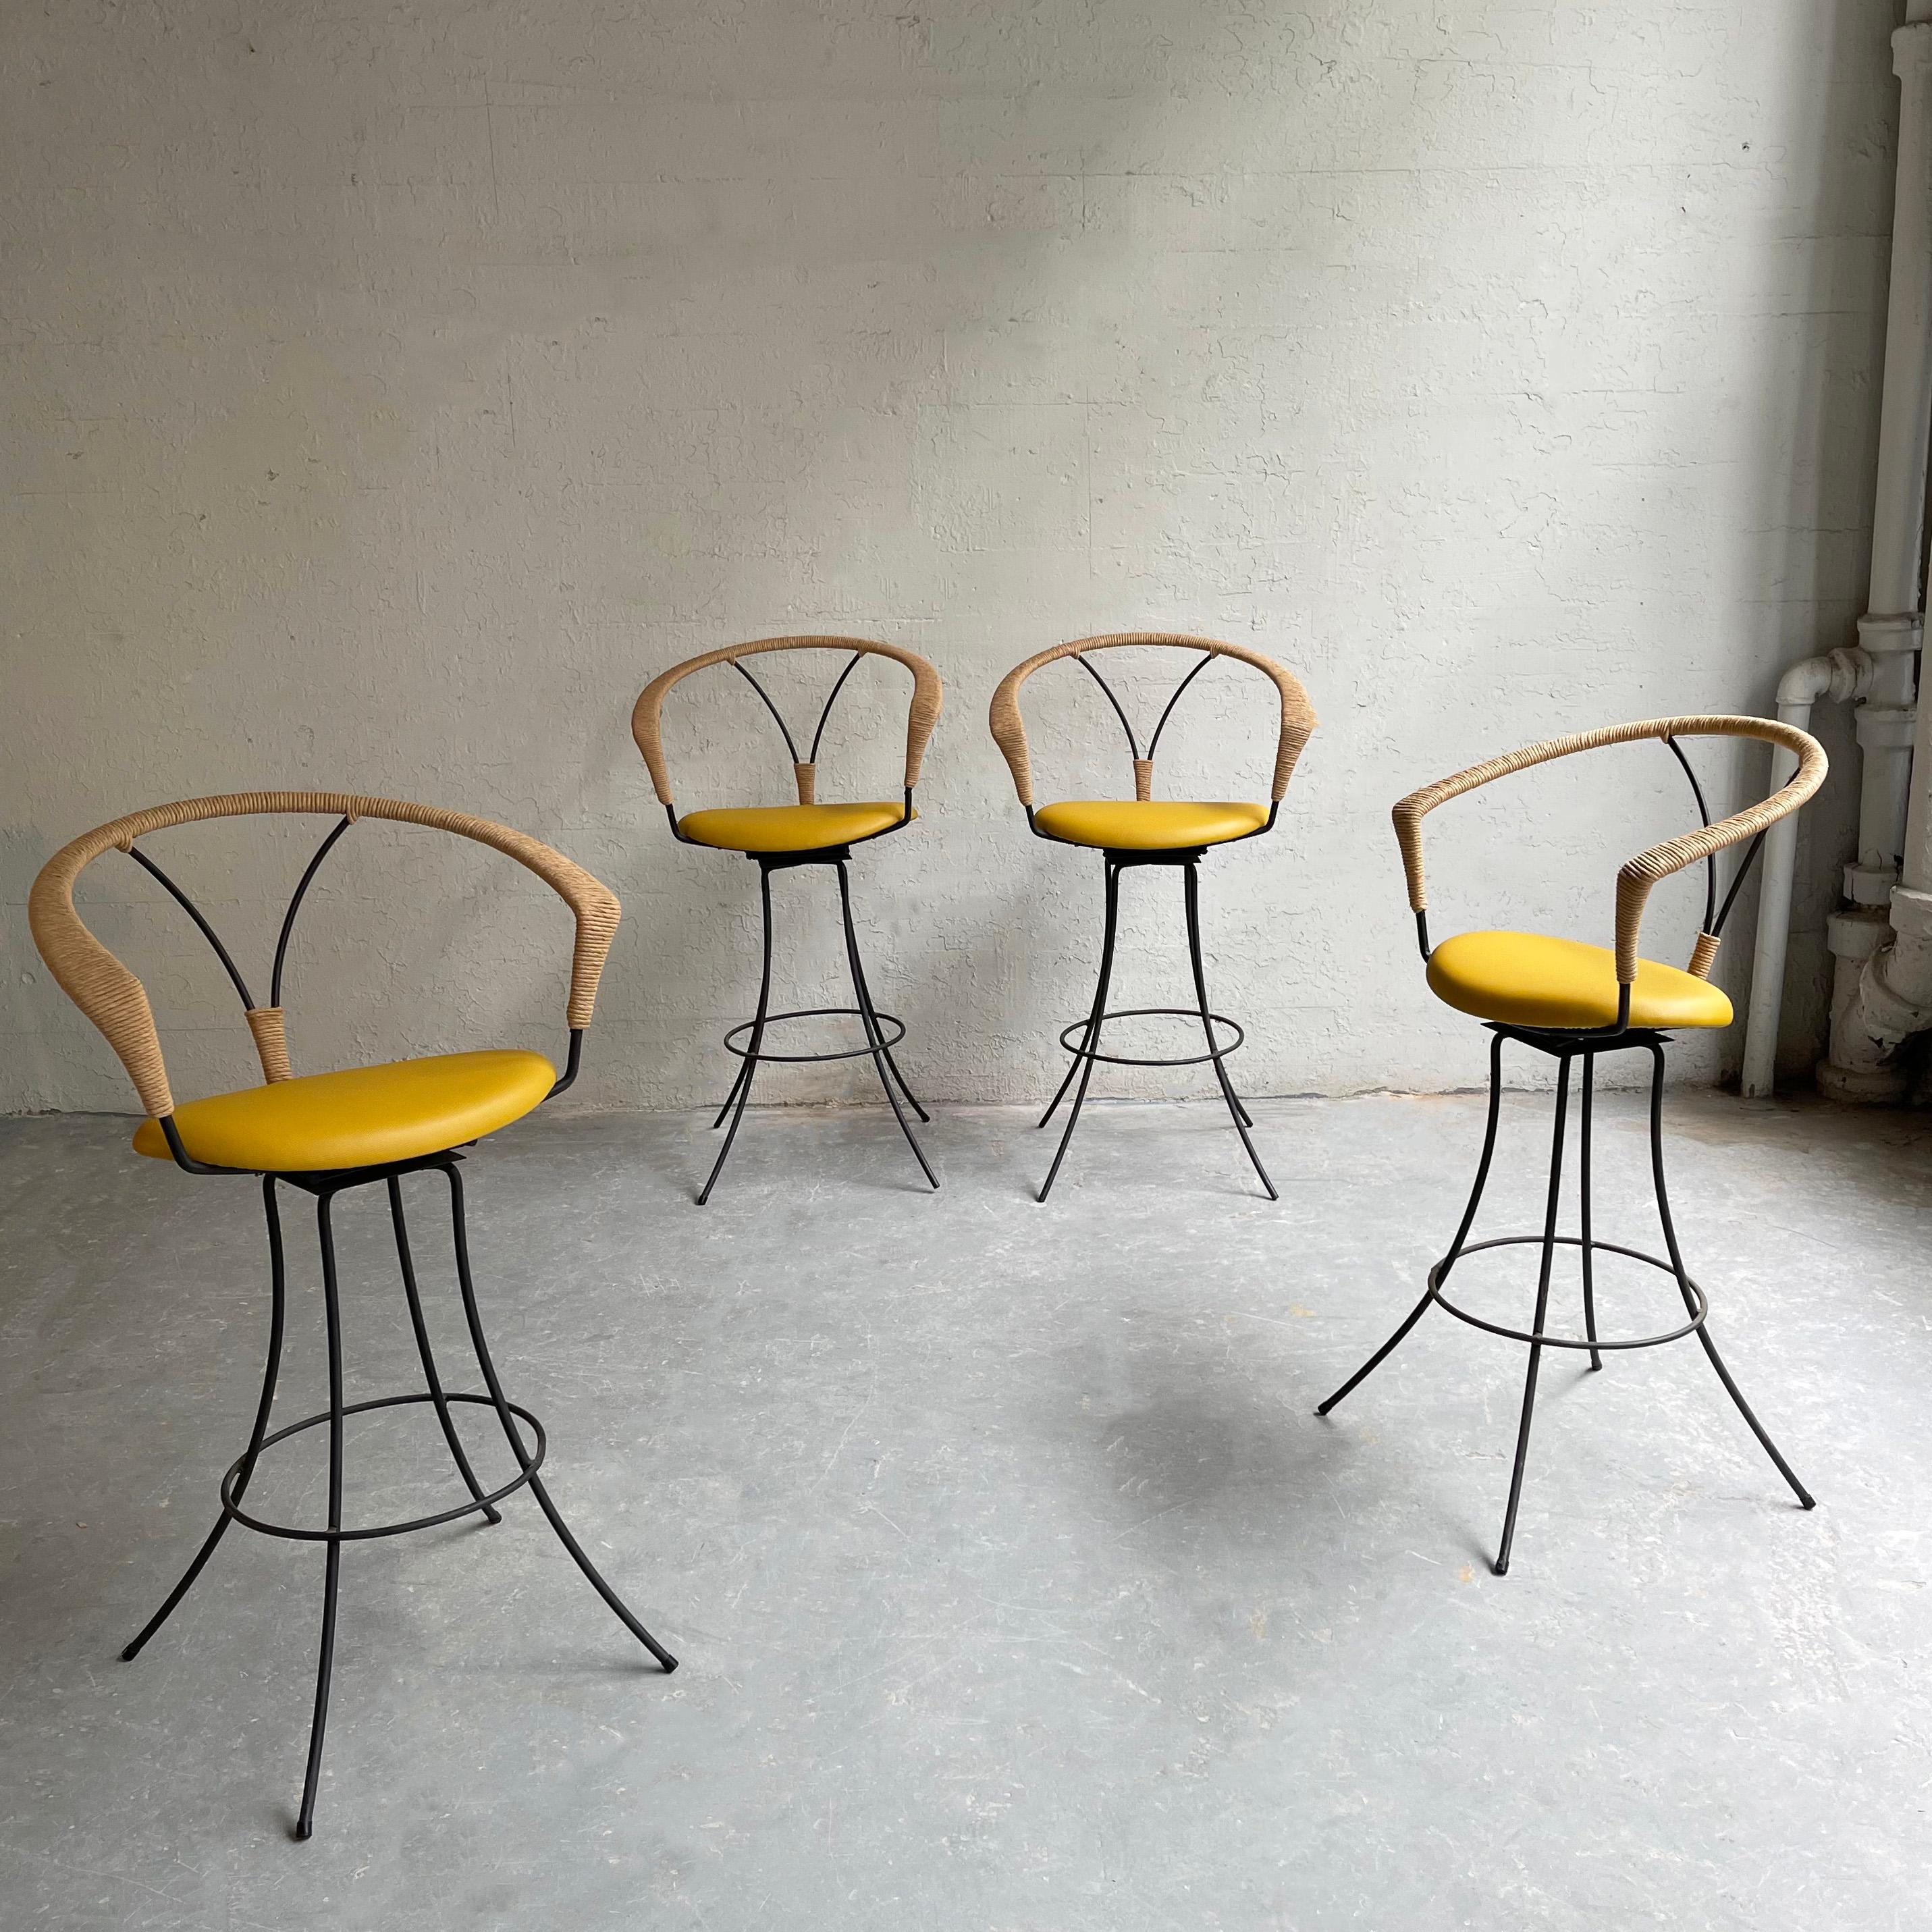 Fantastic set of 4 bar stools in the style of Arthur Unamoff or Danny Ho Fong feature wrought iron frames with newly upholstered, perforated vinyl seats with woven rush details. The stool footprint is 26 inches diameter.